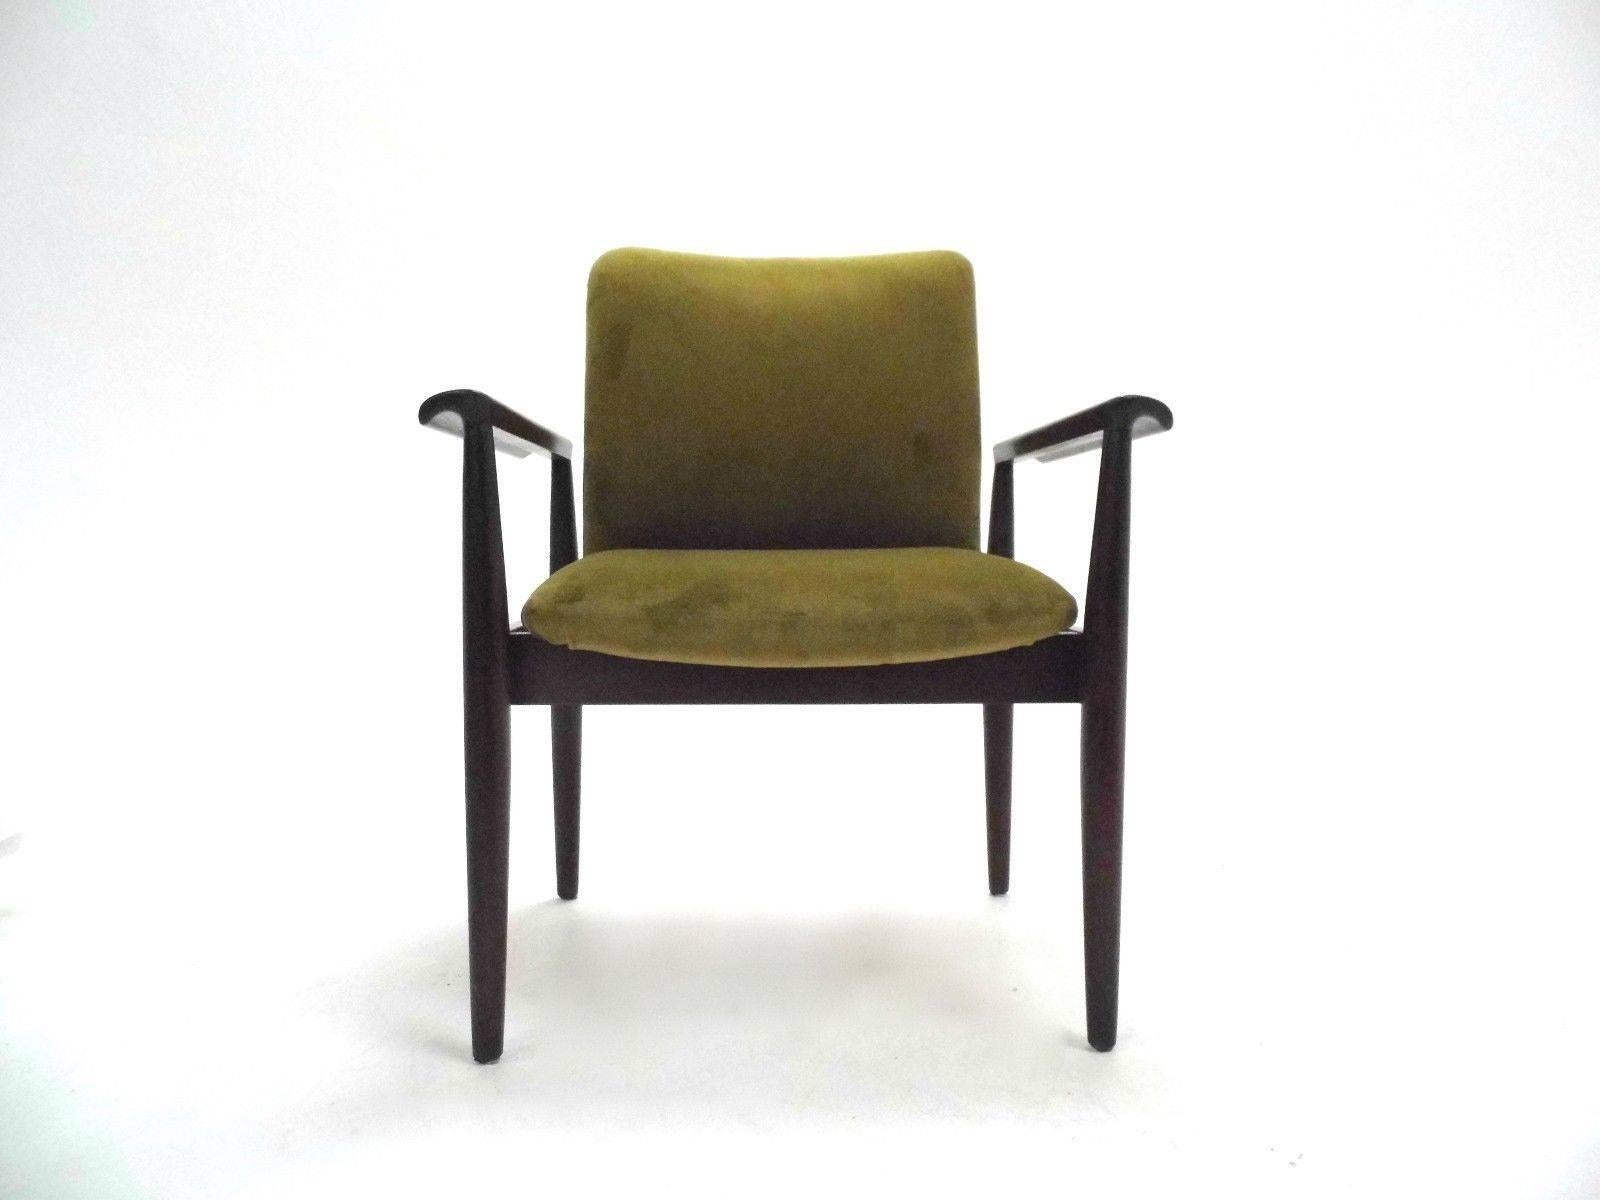 A beautiful Danish green velvet Diplomat model 209 armchair by Finn Juhl for France & Sons, this would make a stylish addition to any living or work area. The chair has a curved backrest and sculptured mahogany armrests for enhanced comfort. A